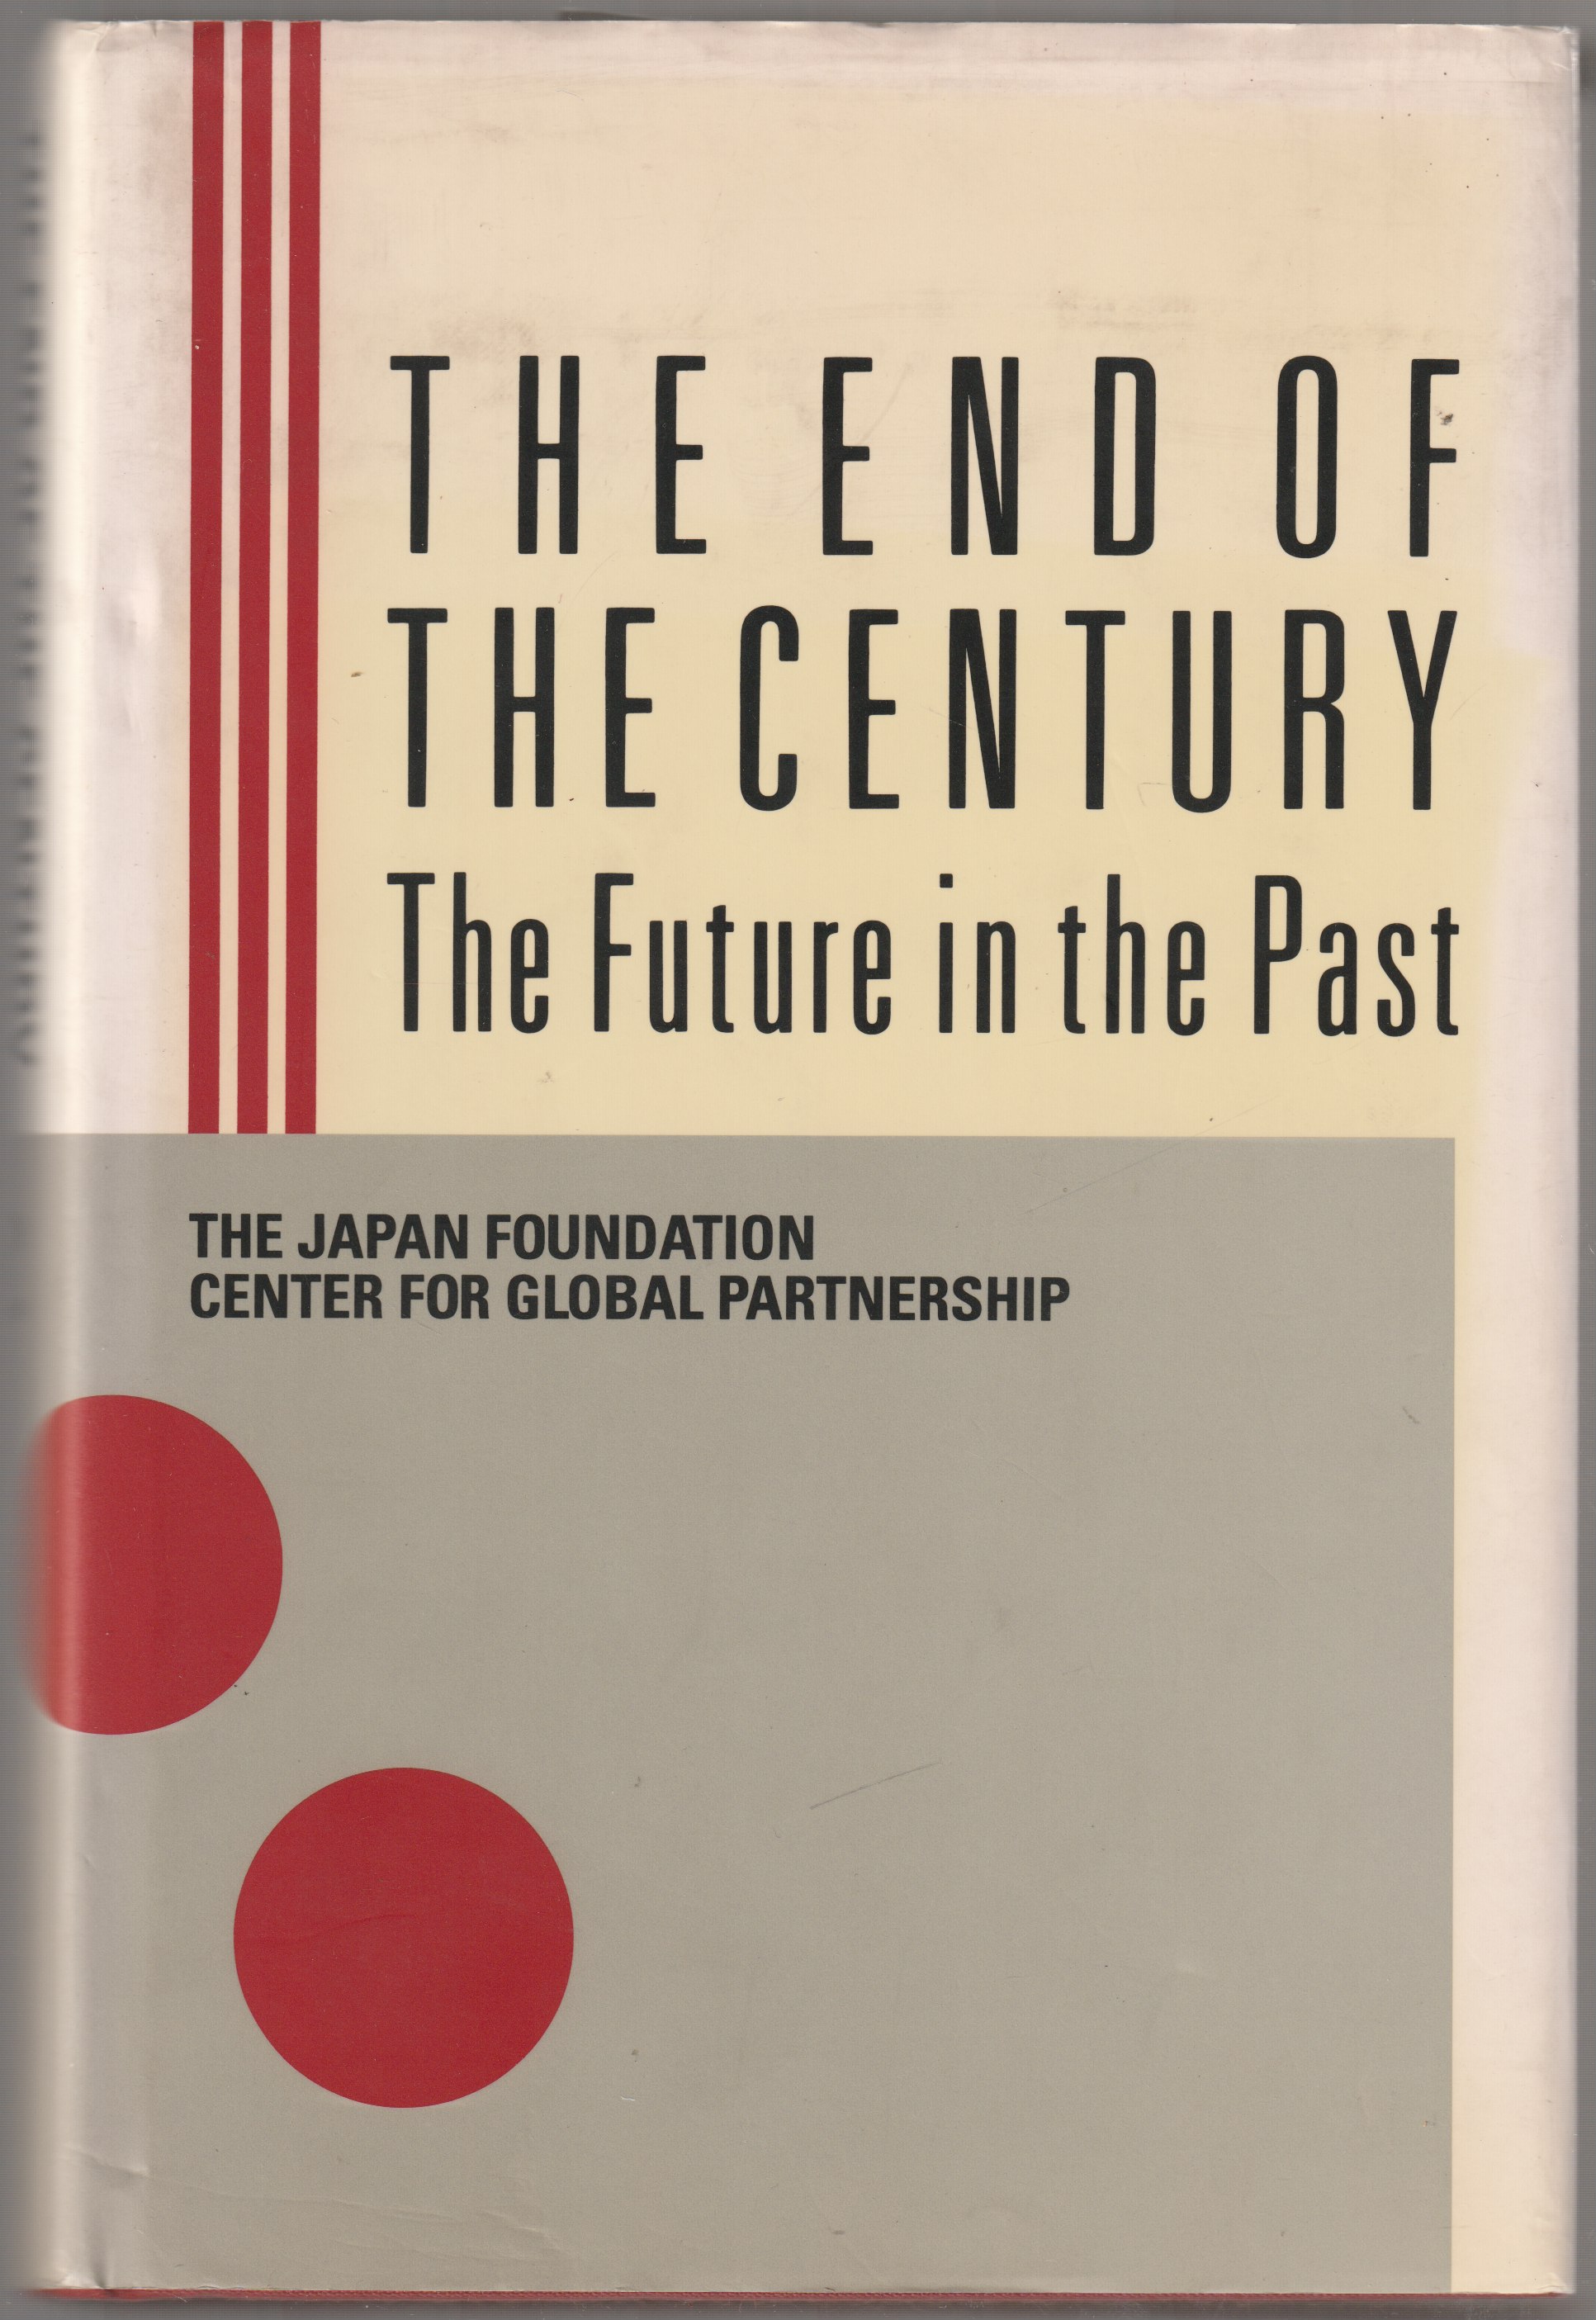 The End of the century : the future in the past.